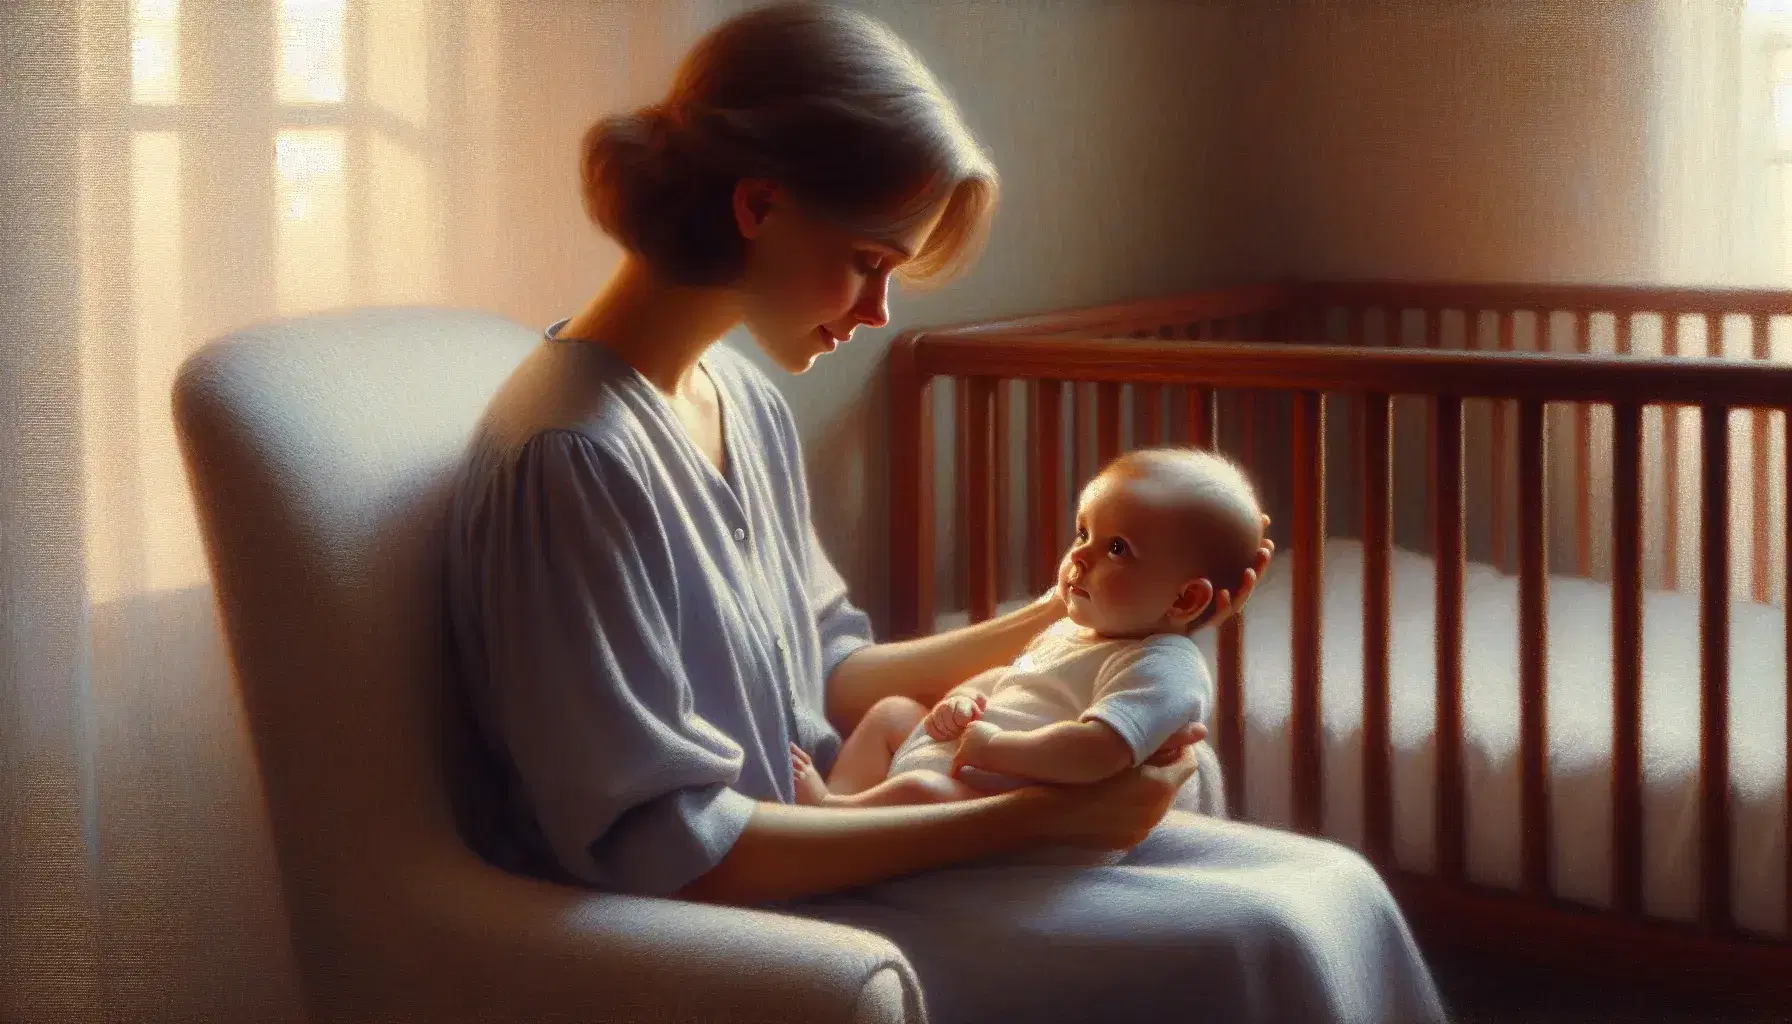 Caregiver cradling a content infant in a cozy nursery, with warm lighting enhancing their affectionate exchange and peaceful surroundings.